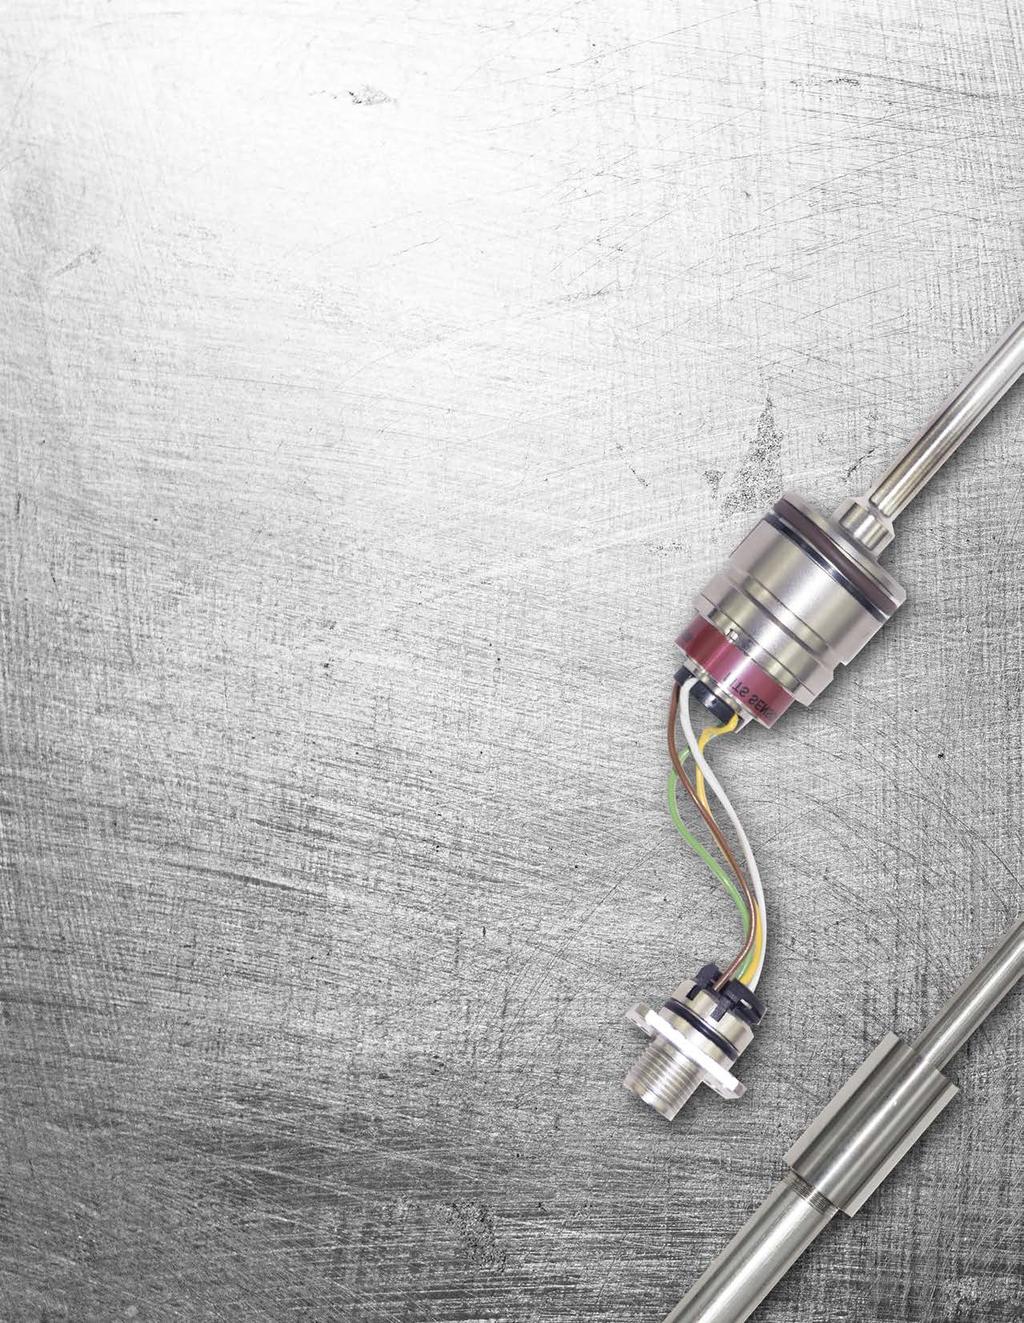 MH-SERIES MS The Temposonics MS sensors are specifically designed for direct stroke measurement in hydraulic cylinders with bore diameters of 28 mm or greater.